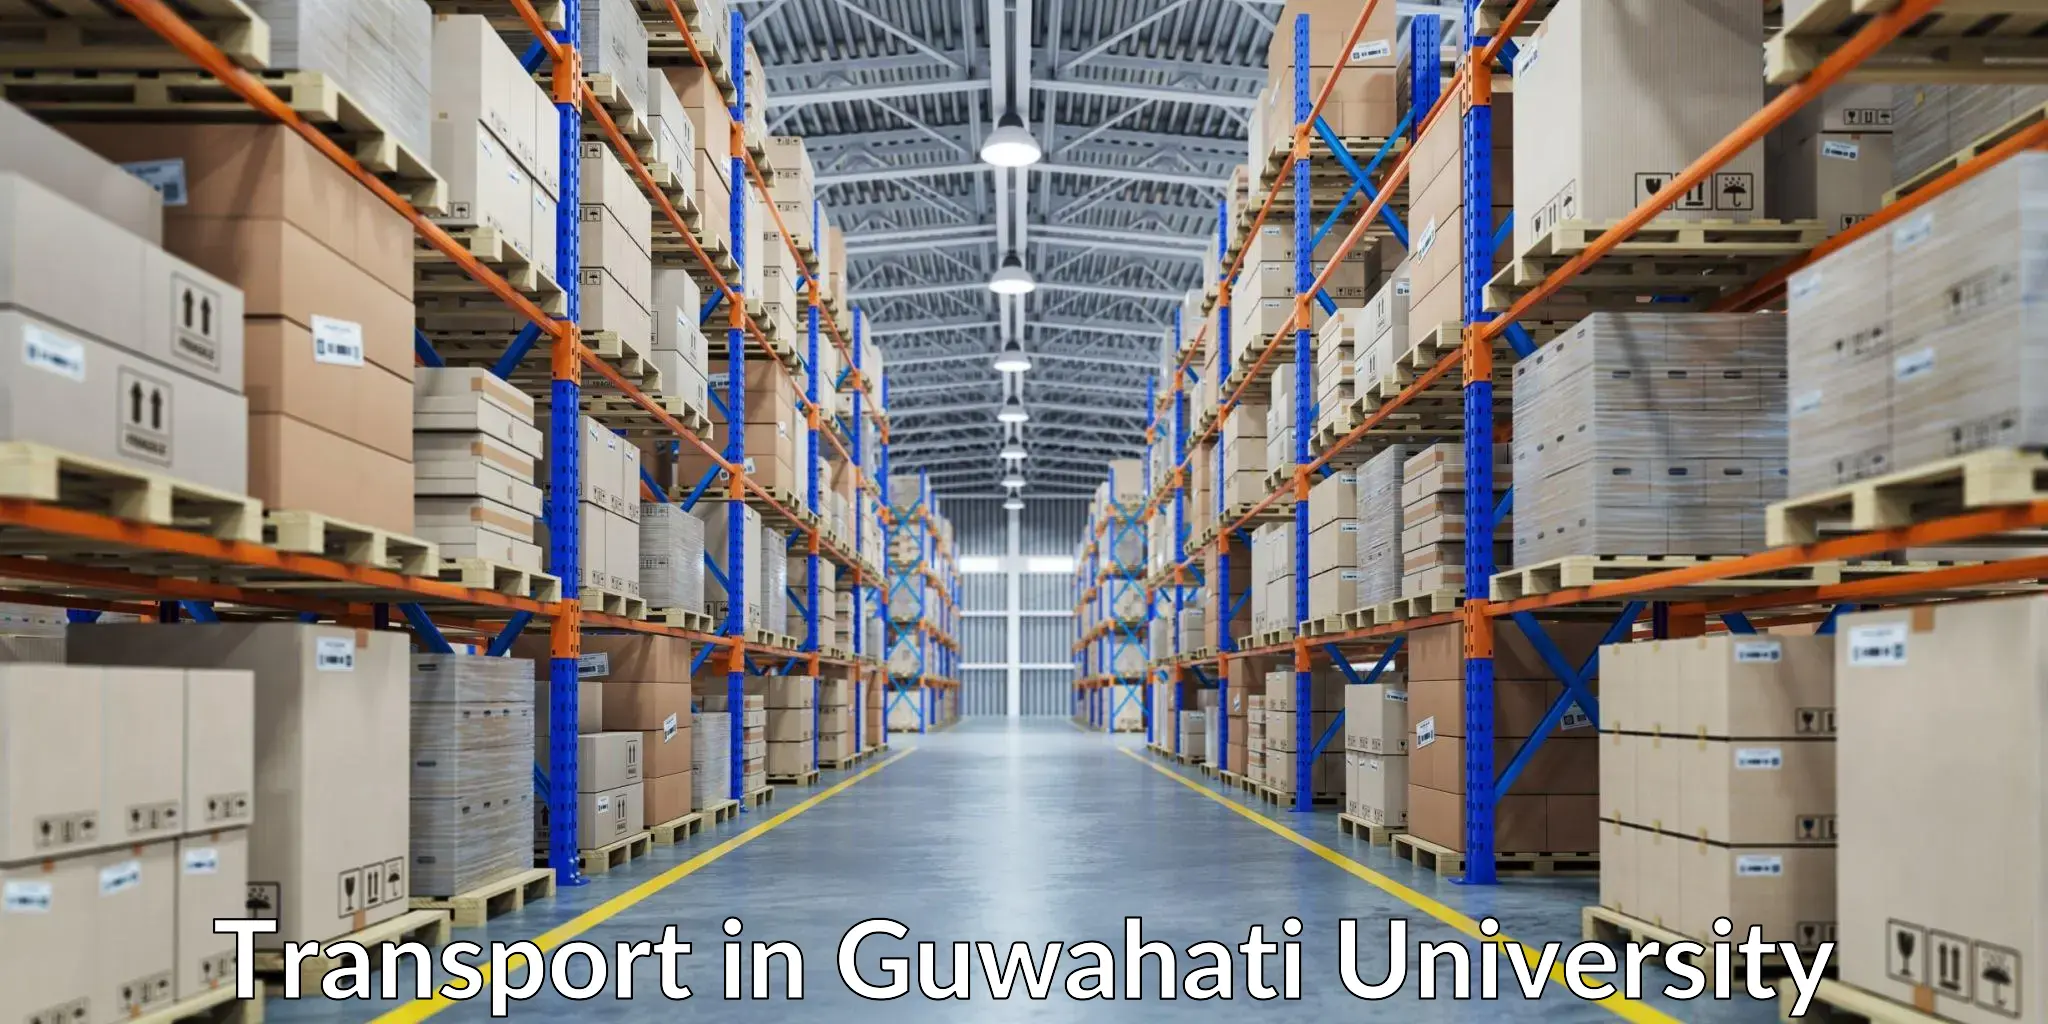 Domestic transport services in Guwahati University